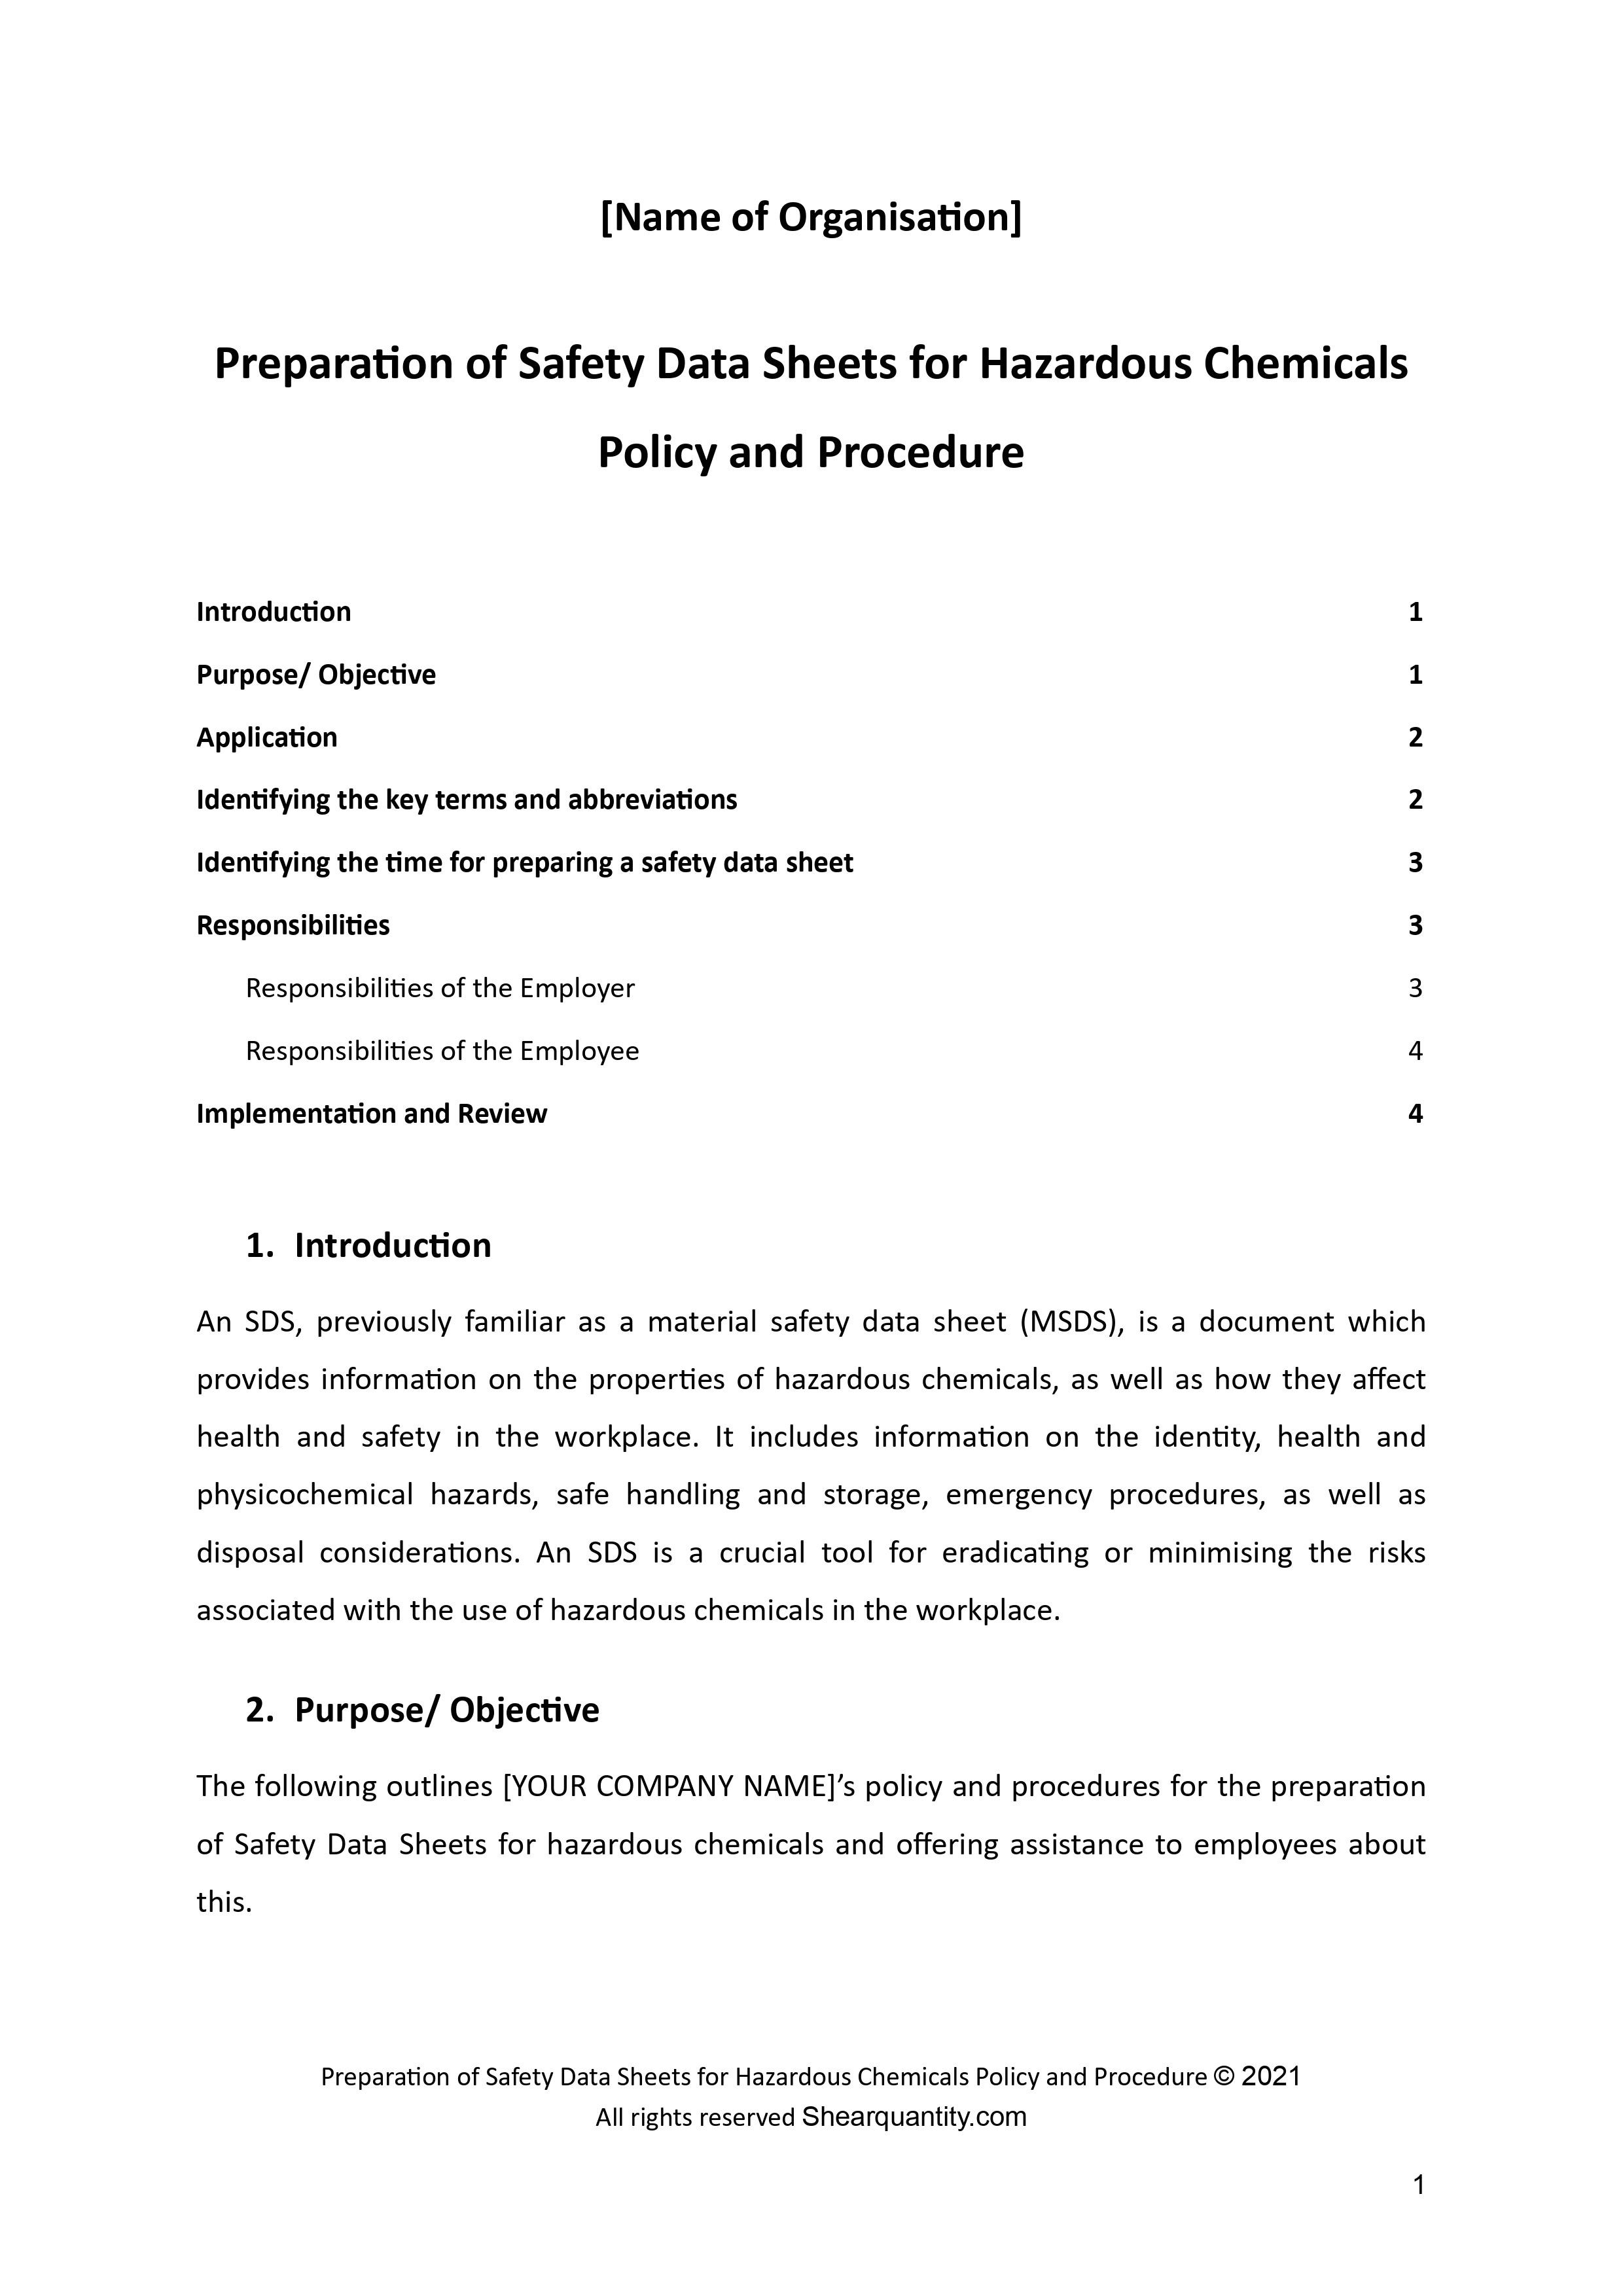 Preparation of Safety Data Sheets for Hazardous Chemicals